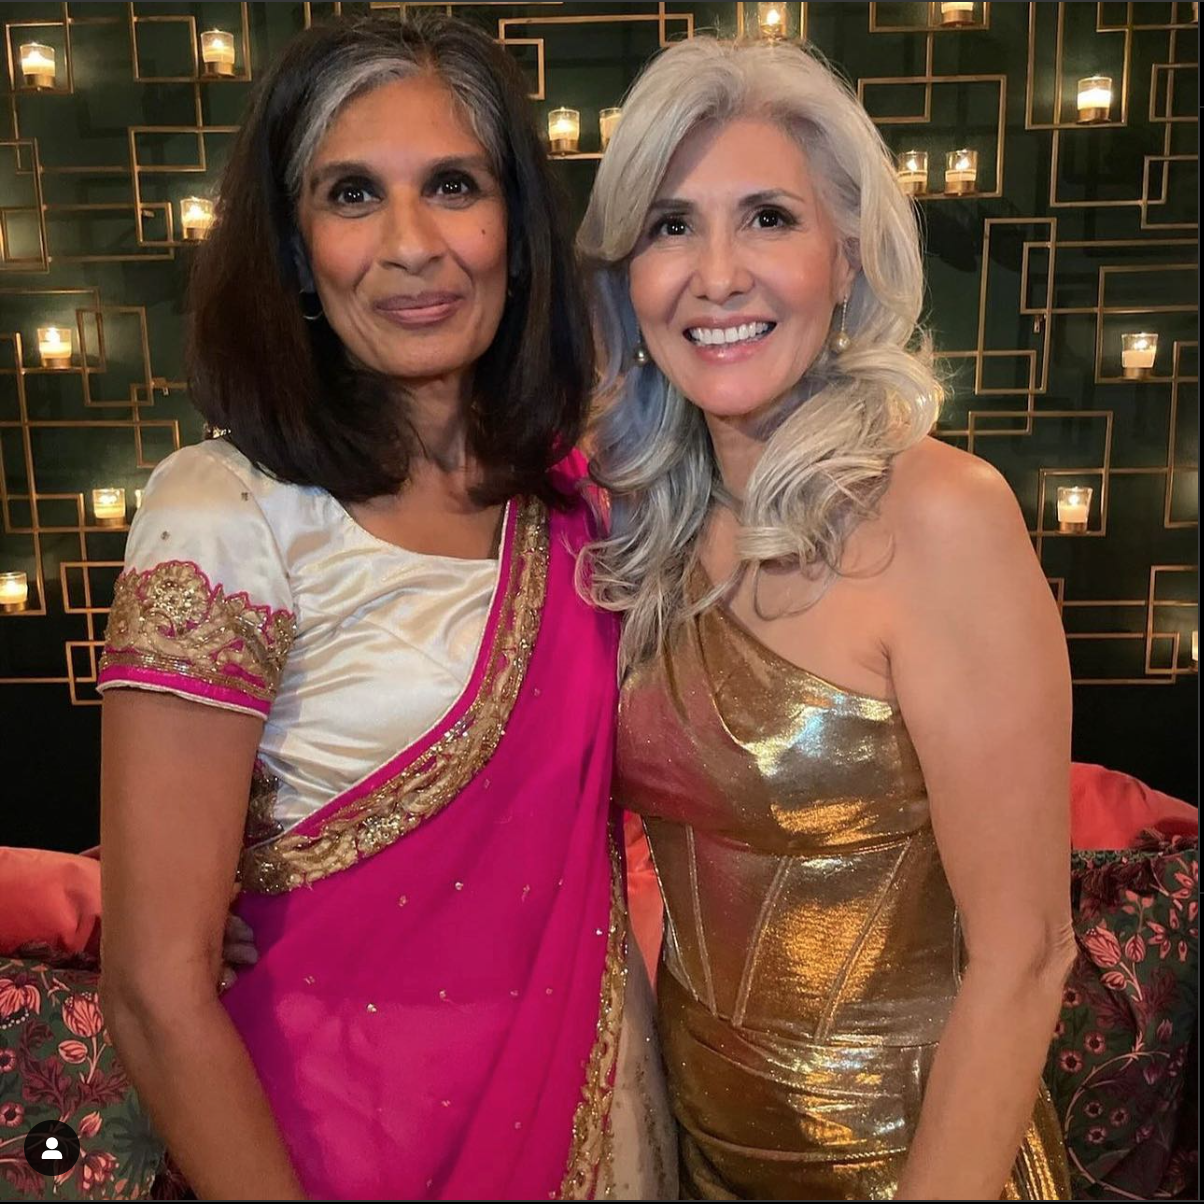 Edith and Marina silver haired beauties posing together apparently became best friends